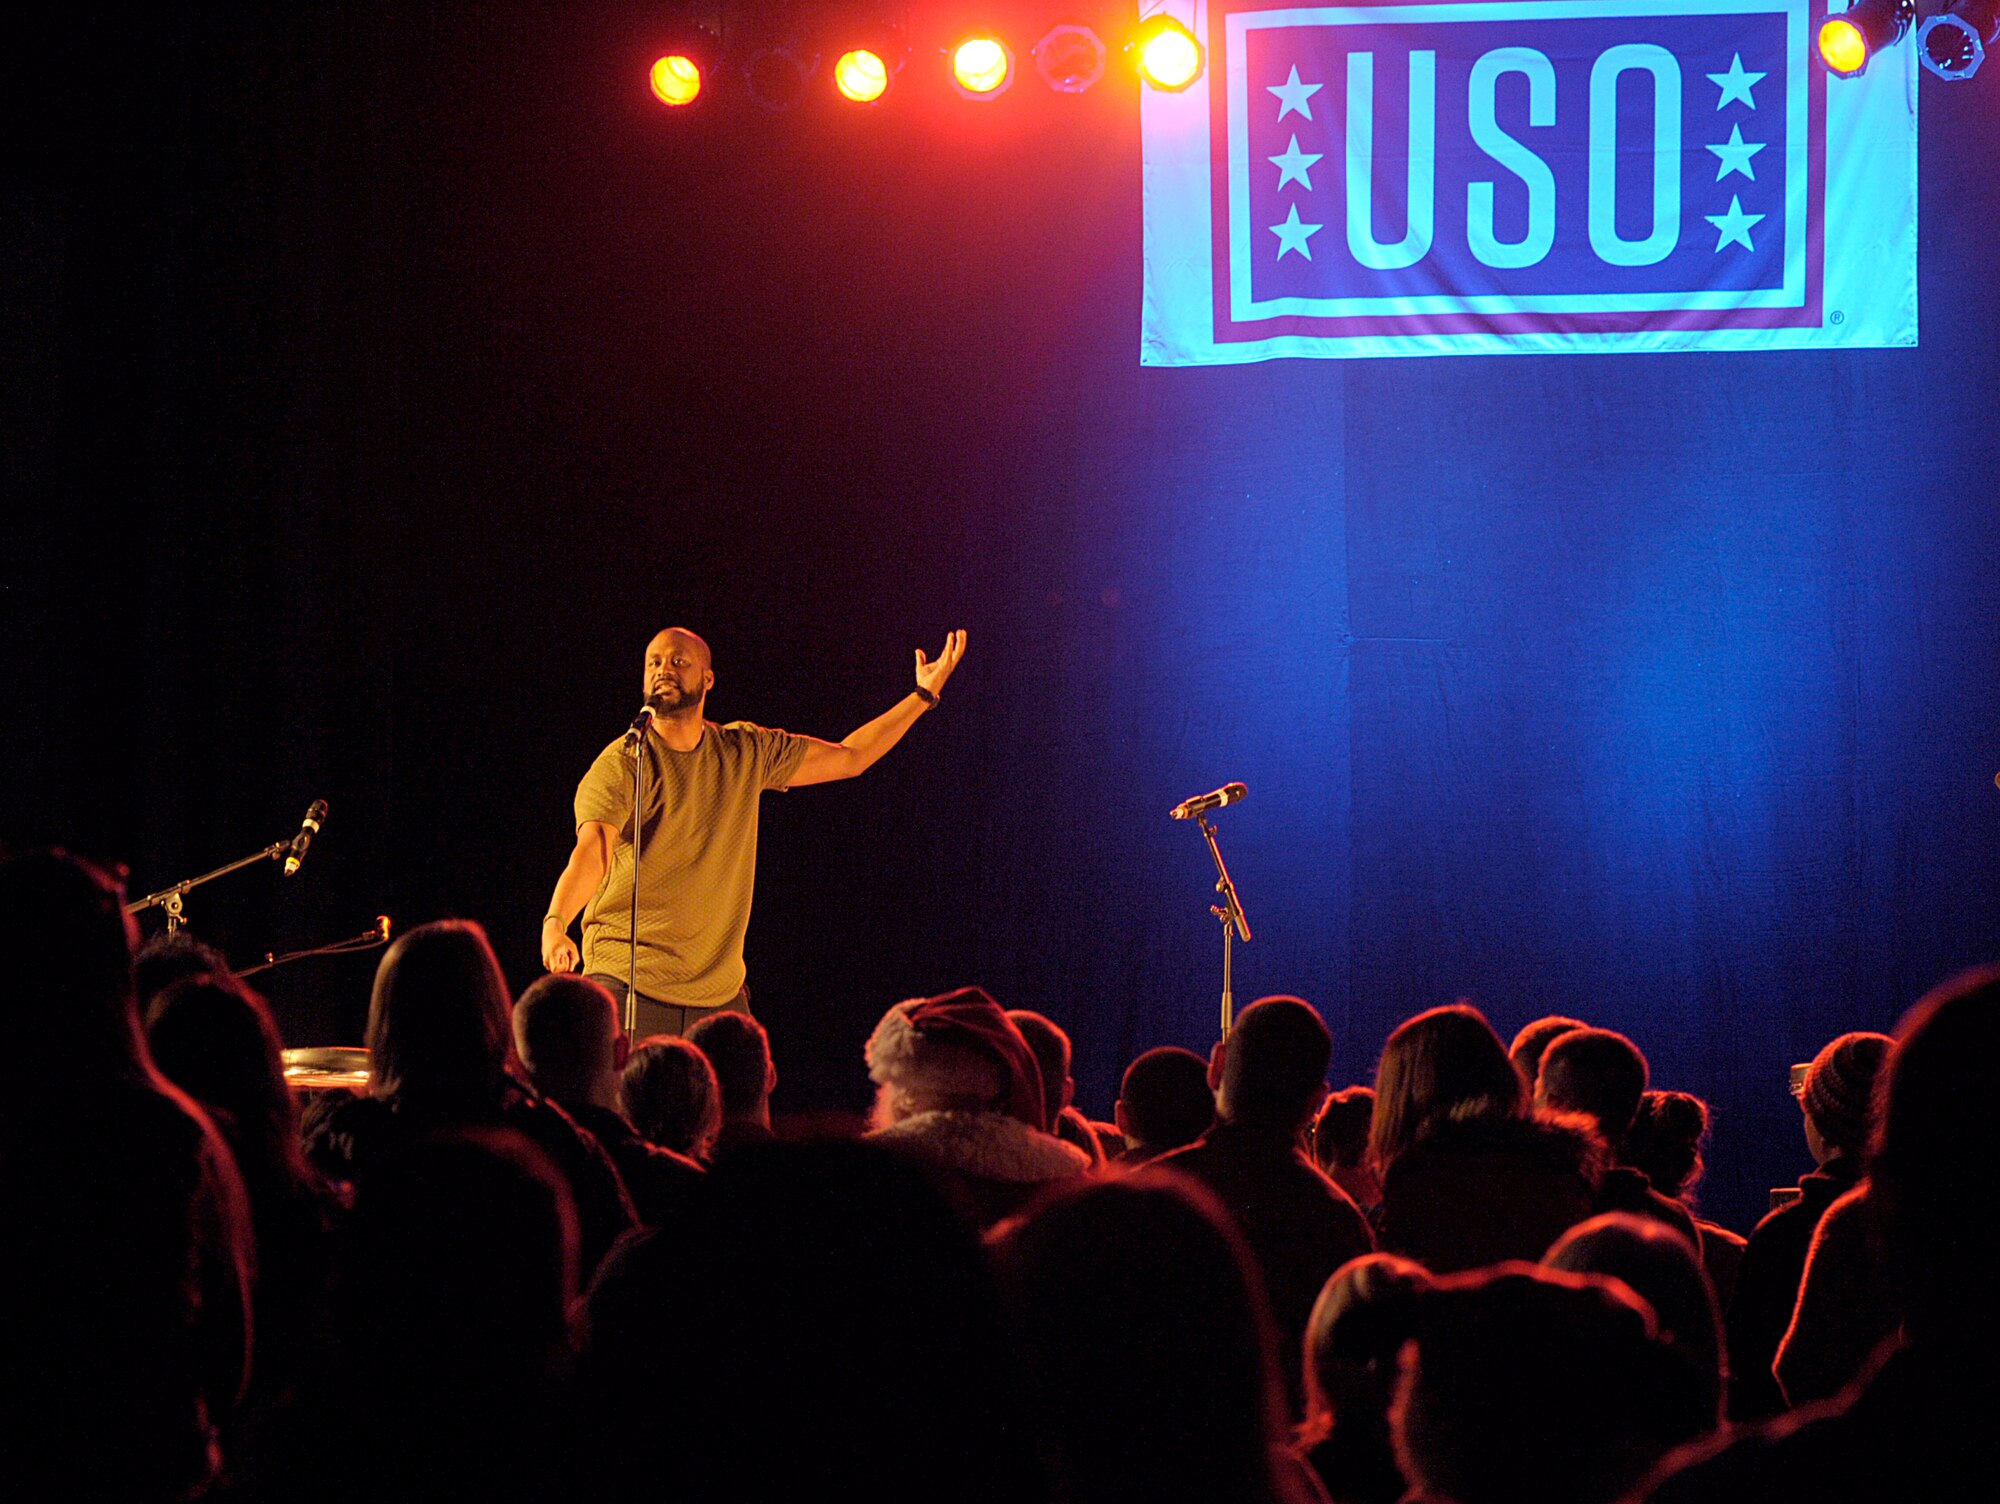 Comedian Sydney Castillo performs during the 2015 USO Holiday Troop Tour Dec. 9, 2015, at Ramstein Air Base, Germany. Castillo and other celebrities joined U.S. Marine Corps Gen. Joseph F. Dunford, chairman of the Joint Chiefs of Staff, as a way to show thanks to service members and their families. (U.S. Air Force photo/Staff Sgt. Timothy Moore)